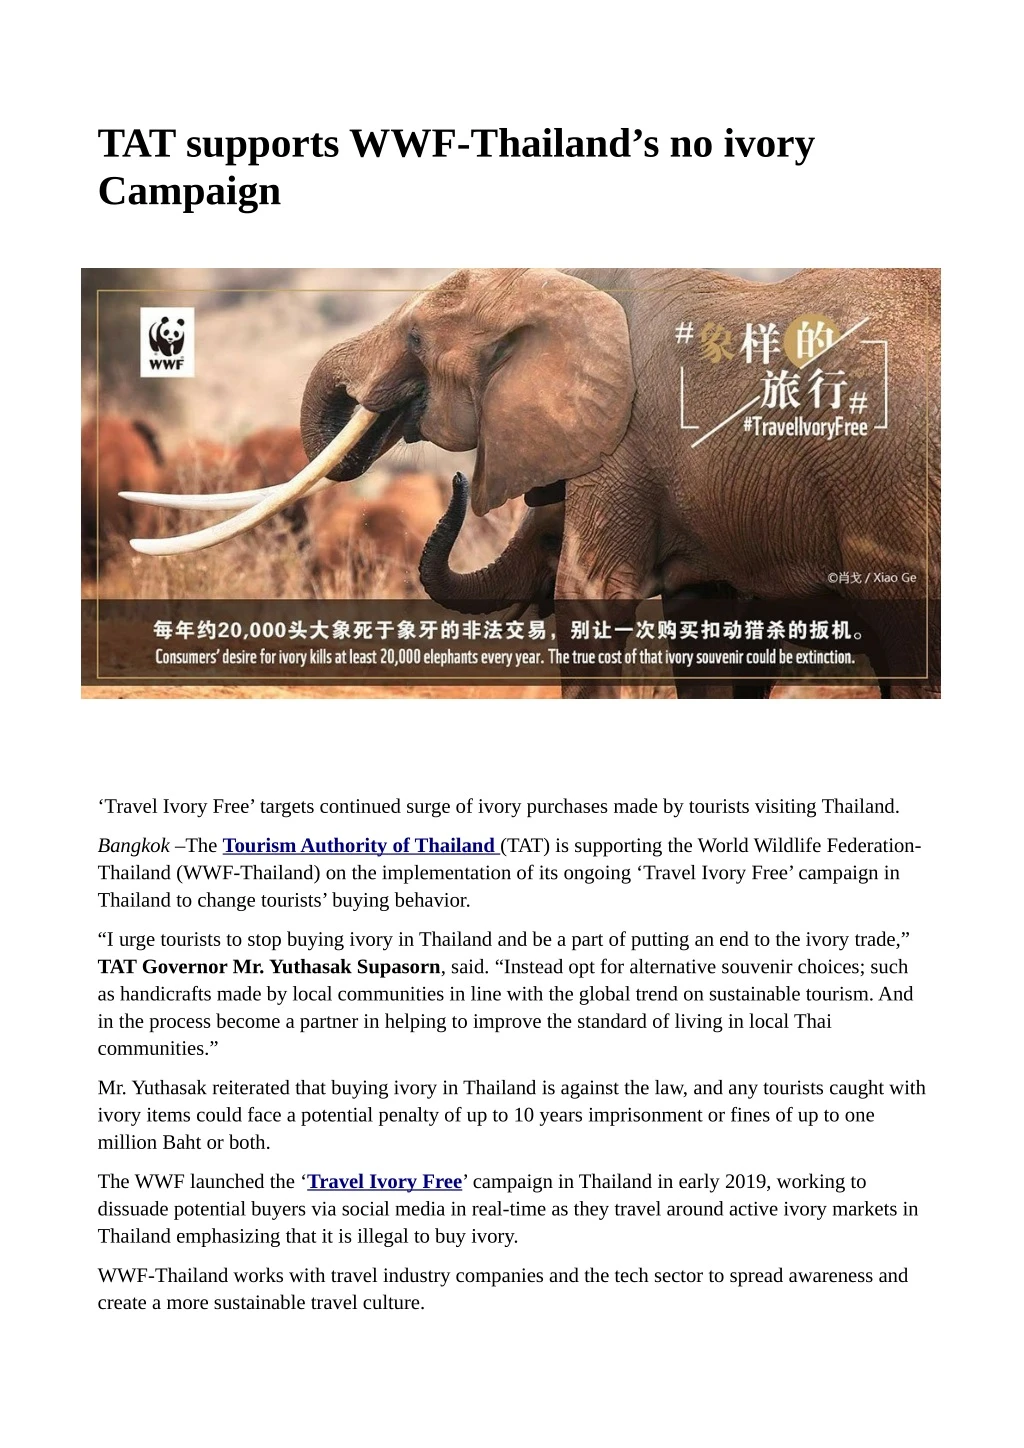 tat supports wwf thailand s no ivory campaign